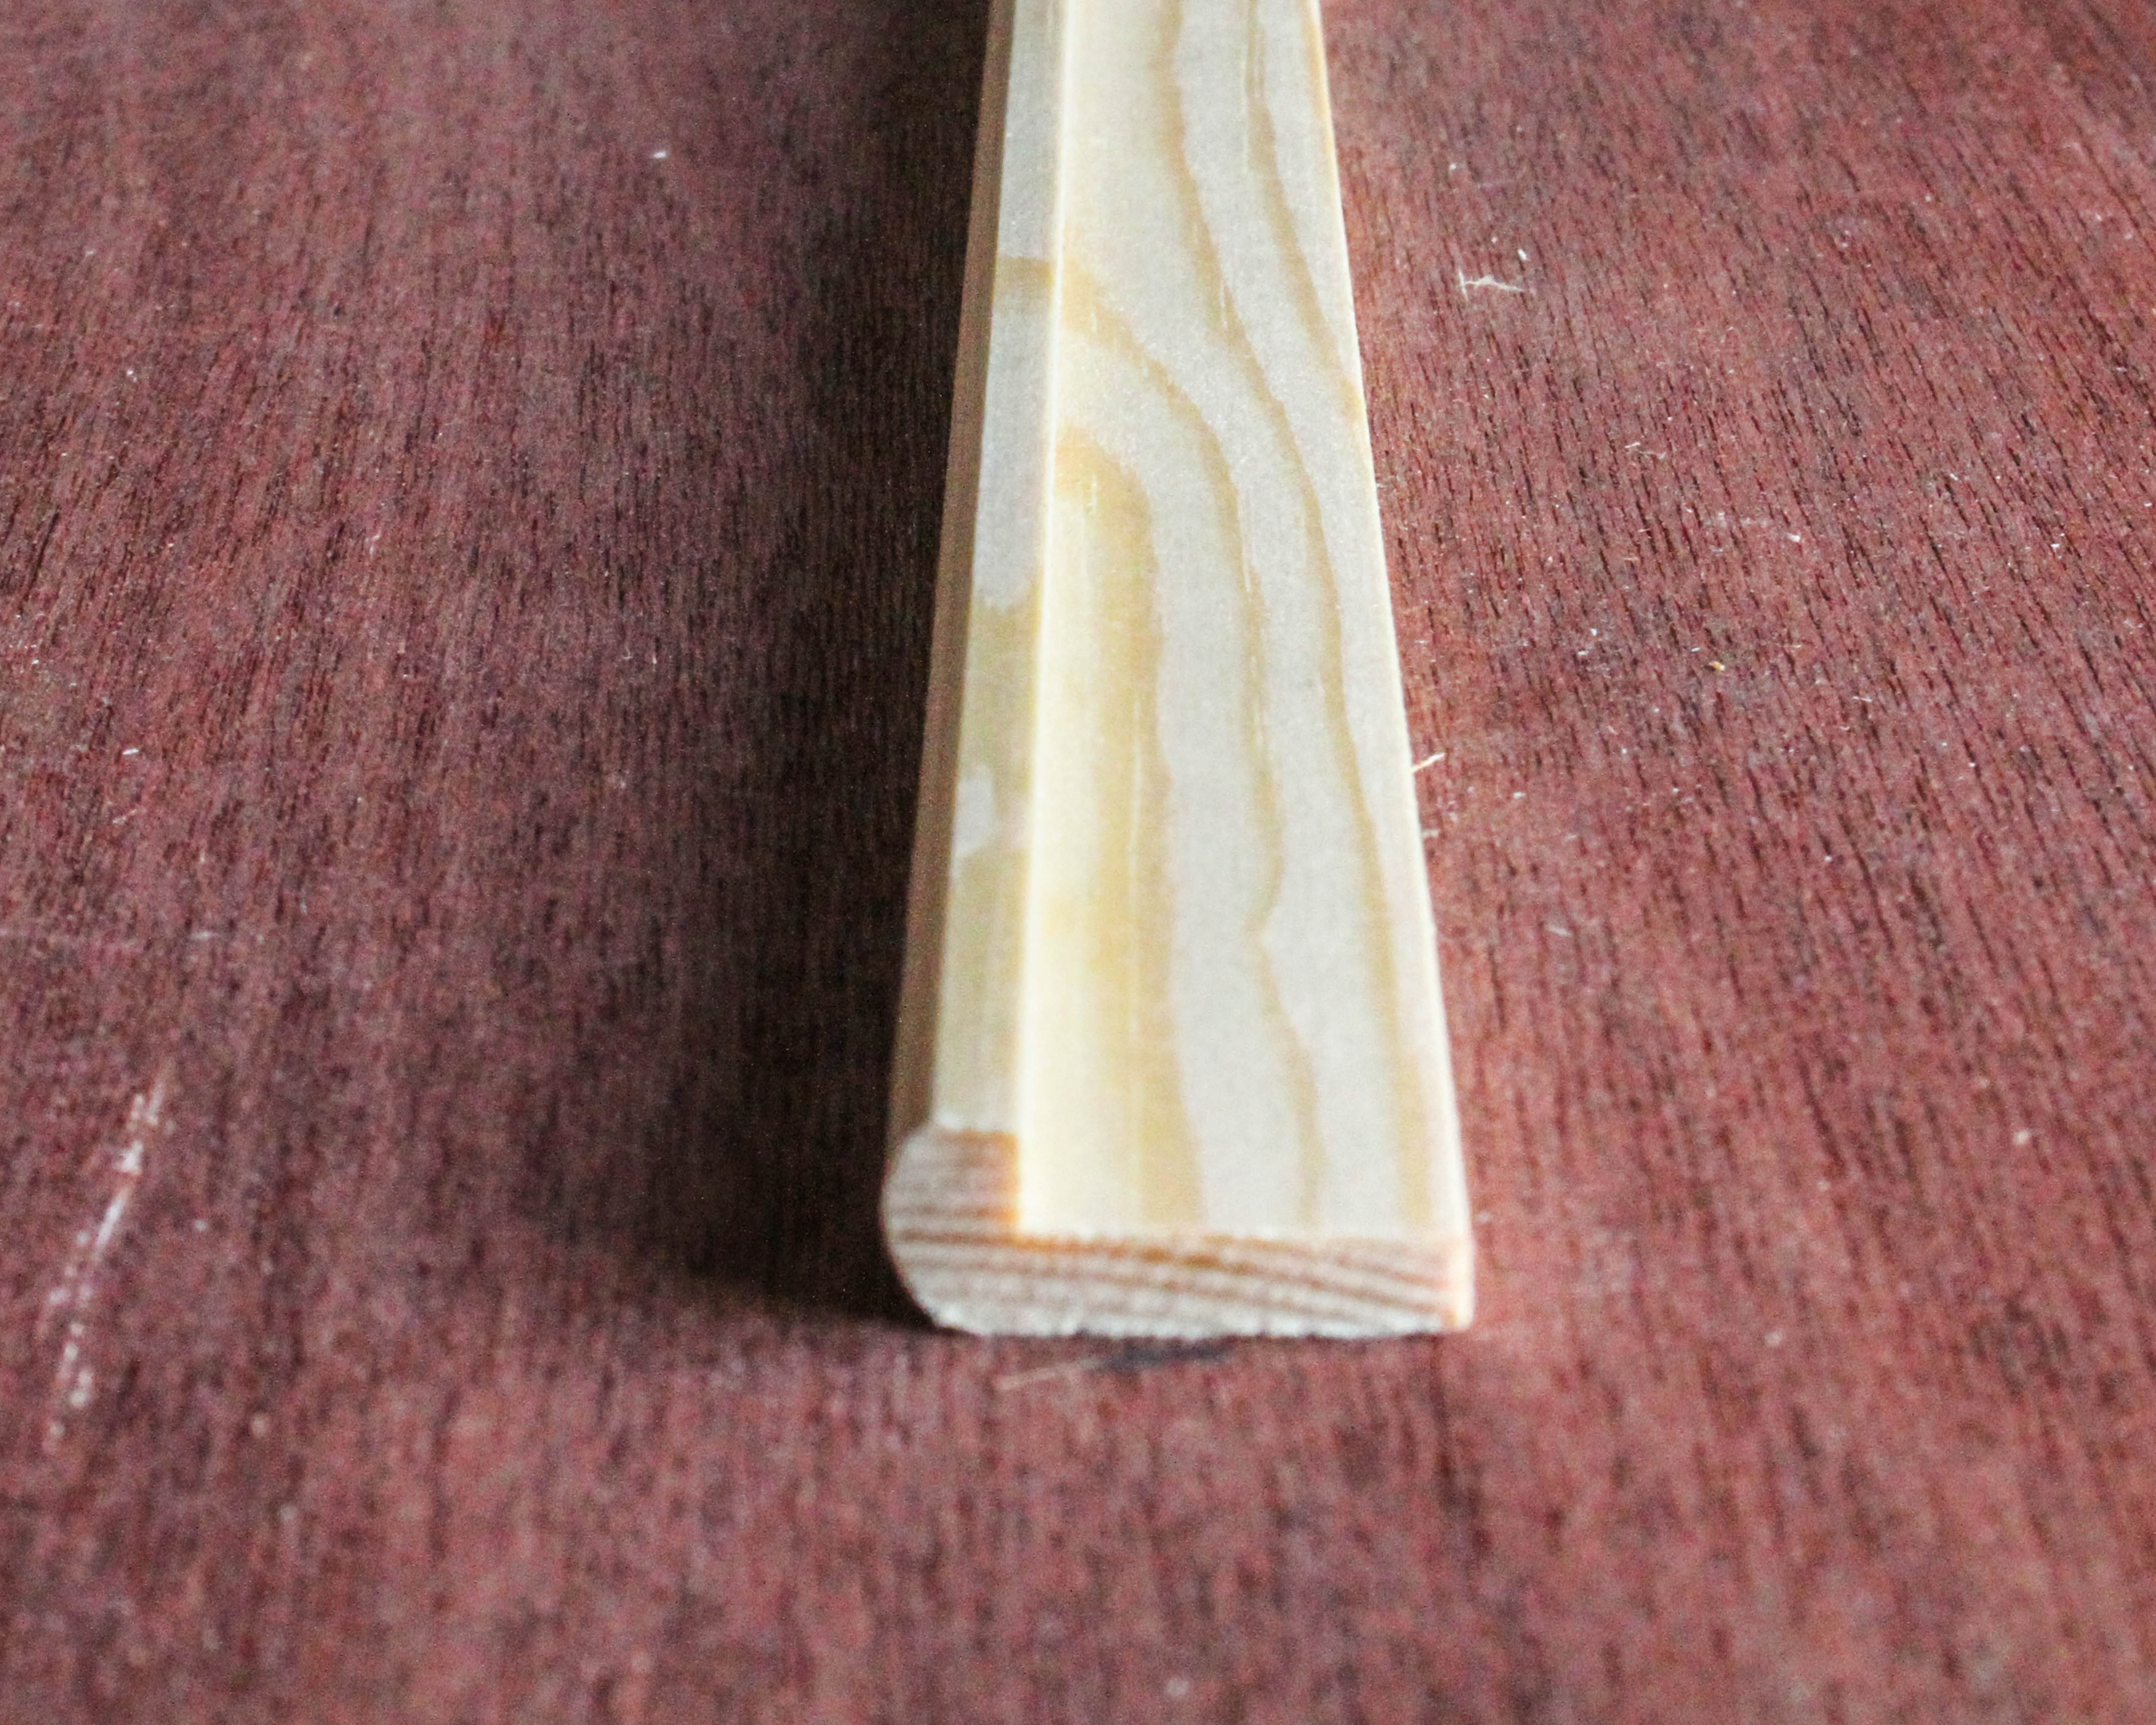  8x21mm  Hockey Stick Moulding  in premium grade clear Pine